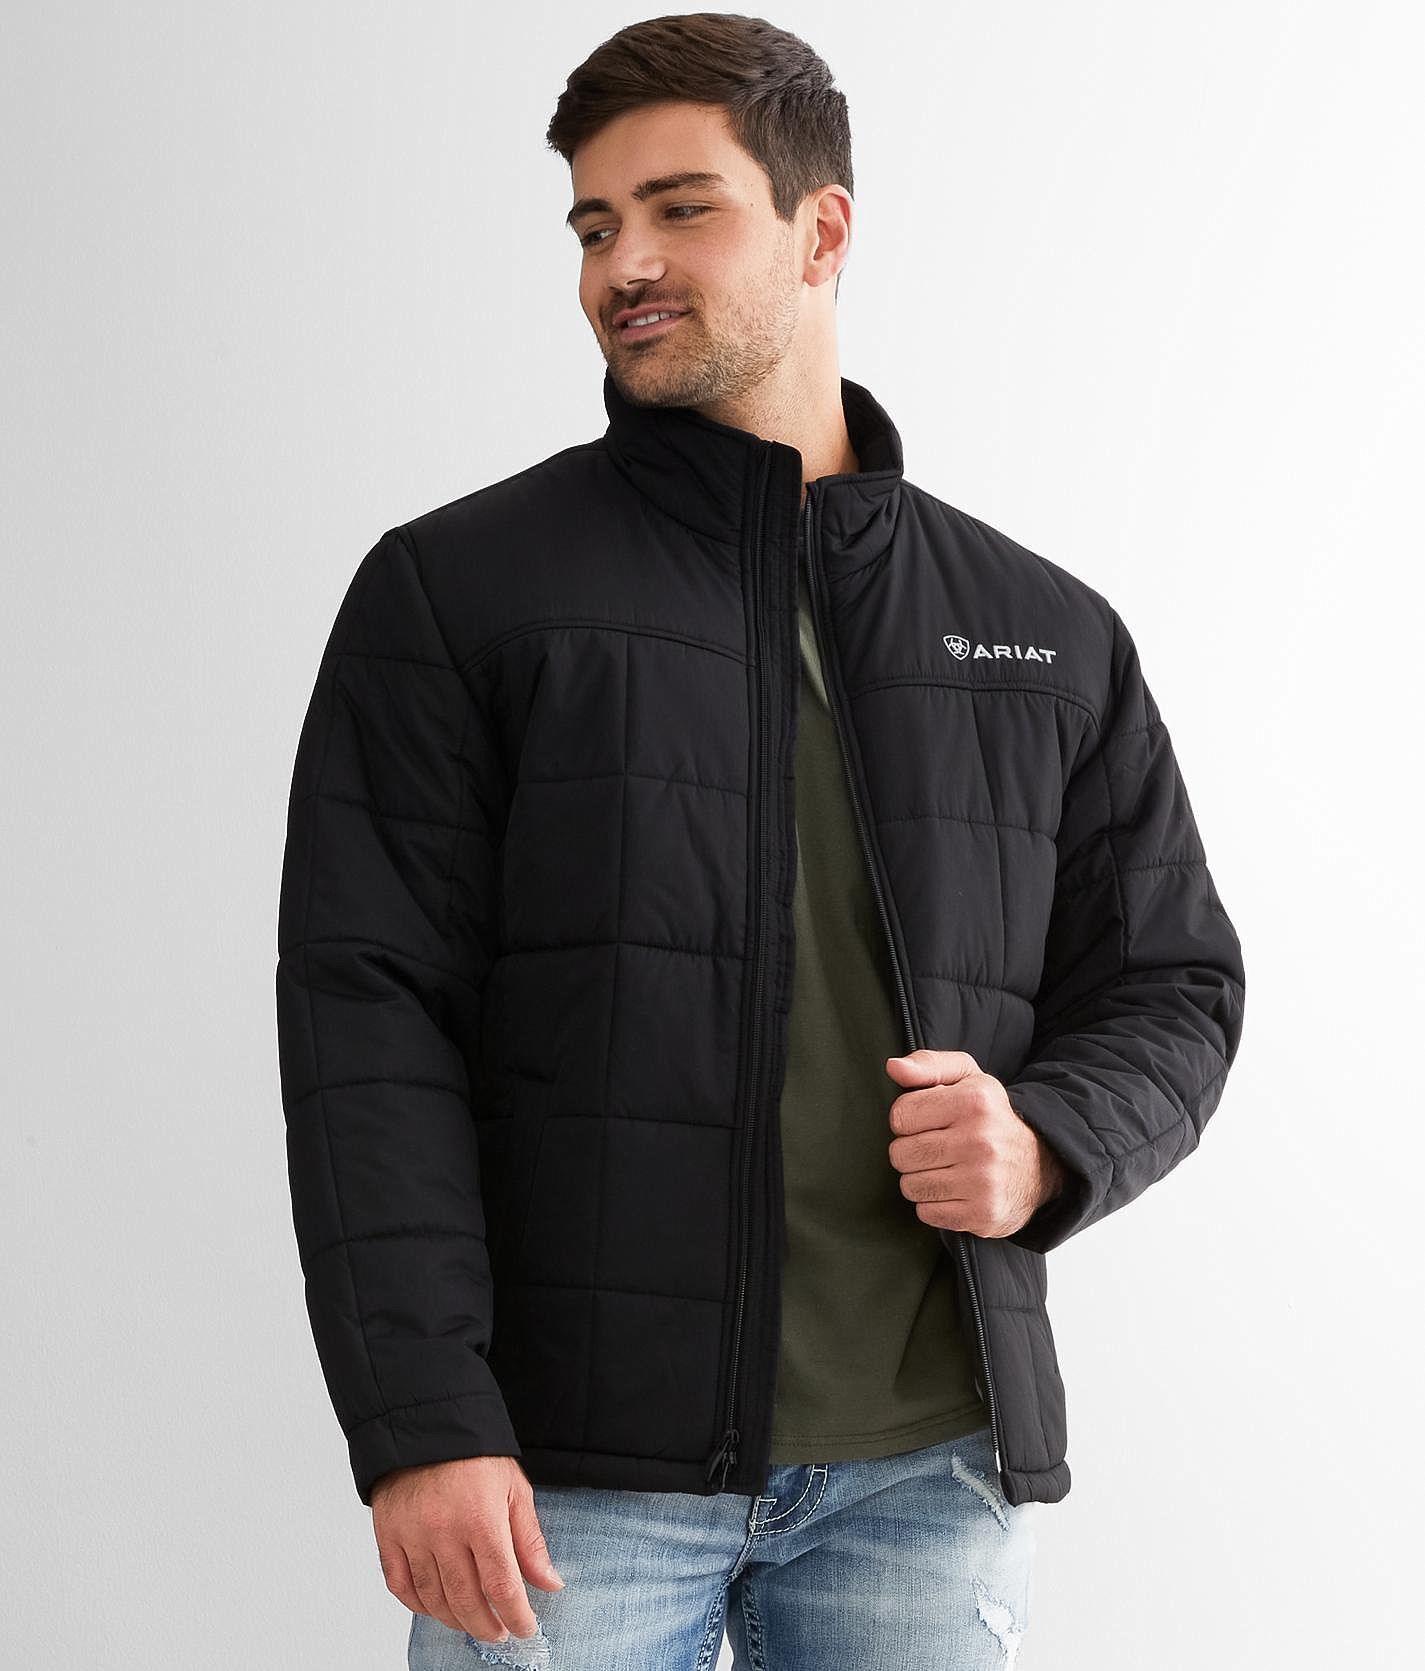 Ariat Crius Insulated Jacket  - Black - male - Size: 2L